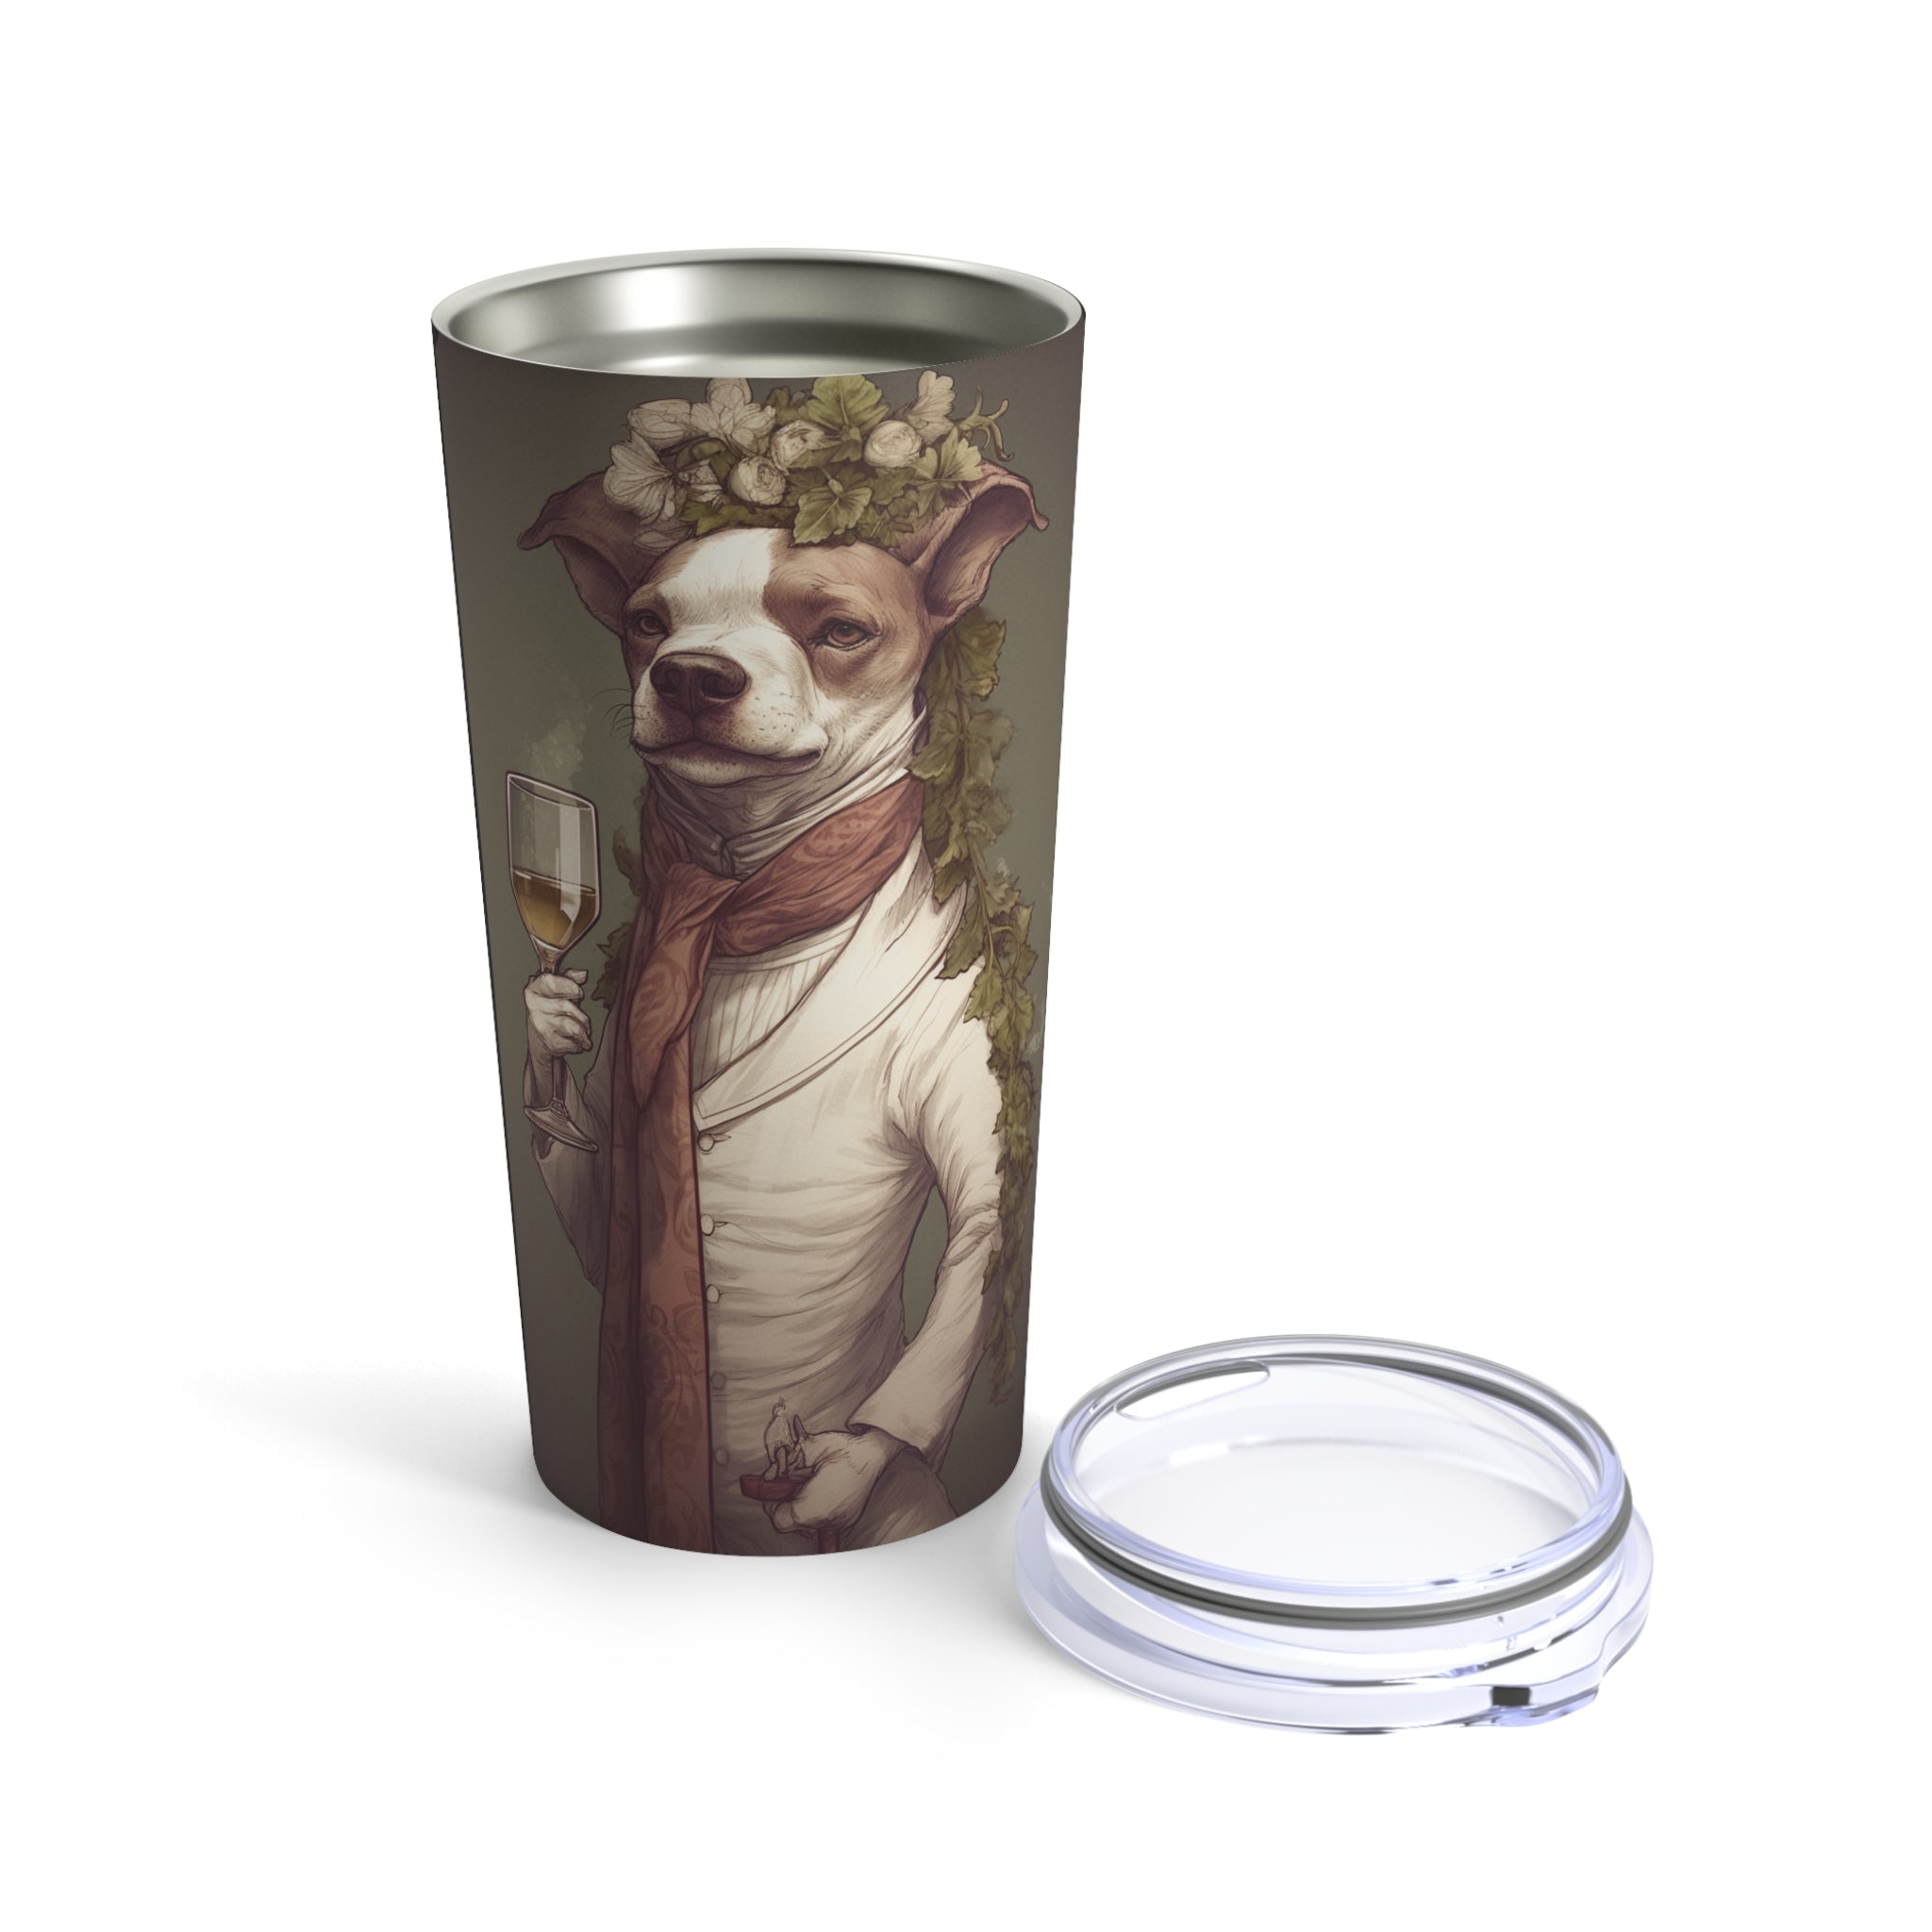 🍷 Wine Baron Doggy Gentleman Tumbler 20oz - Stylish Dog Lover's Wine Glass | Sip in Elegance with Your Furry Companion